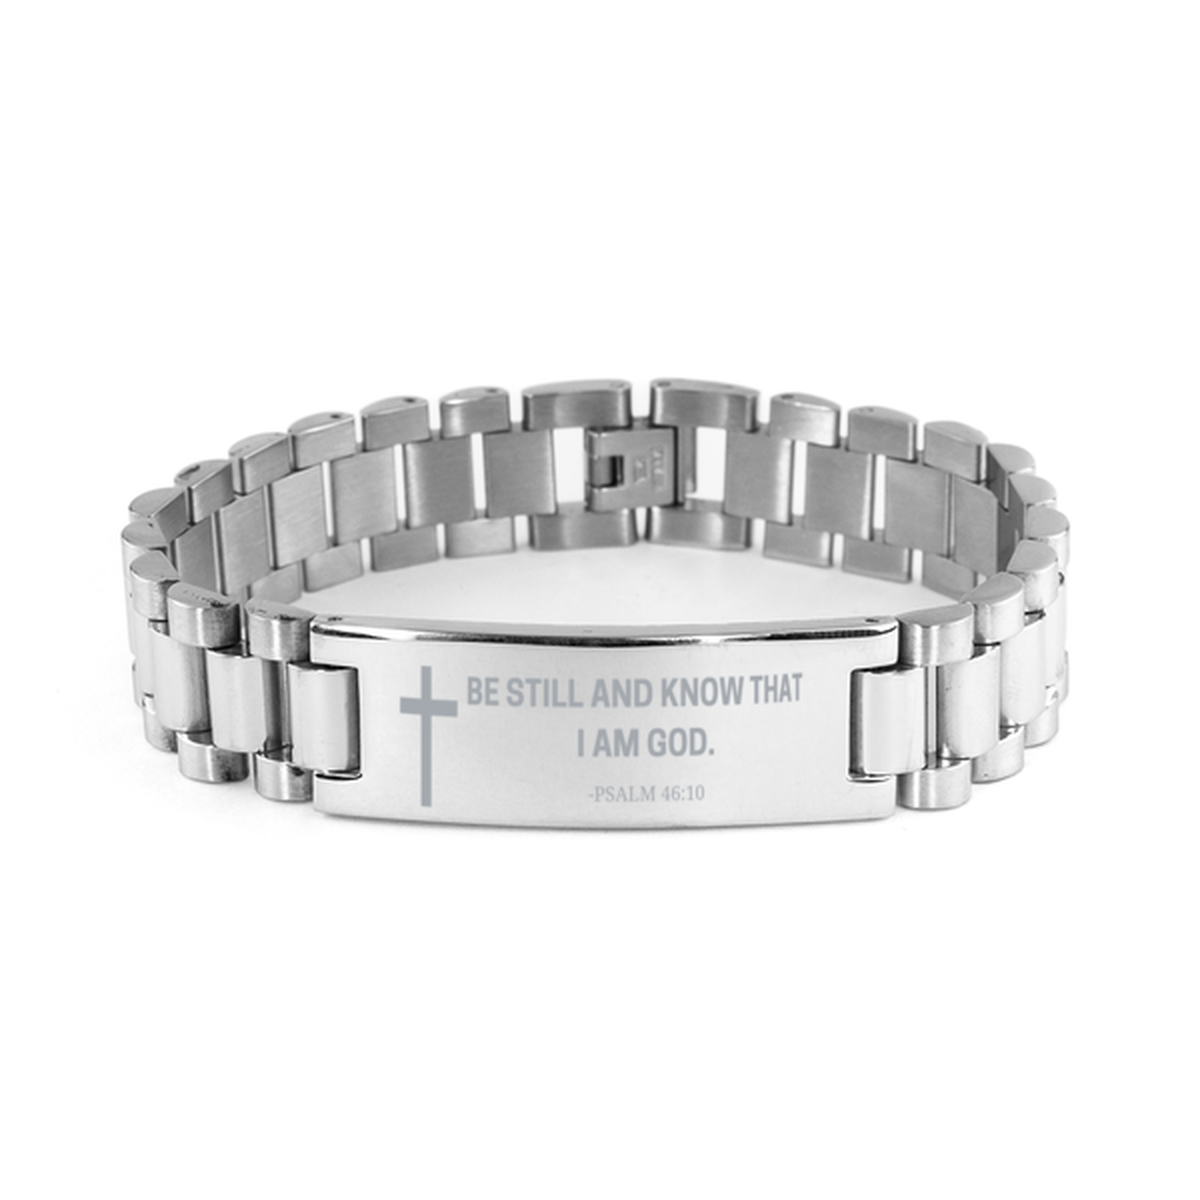 Baptism Gifts For Teenage Boys Girls, Christian Bible Verse Ladder Stainless Steel Bracelet, Be still and know that I am god, Catholic Confirmation Gifts for Son, Godson, Grandson, Nephew